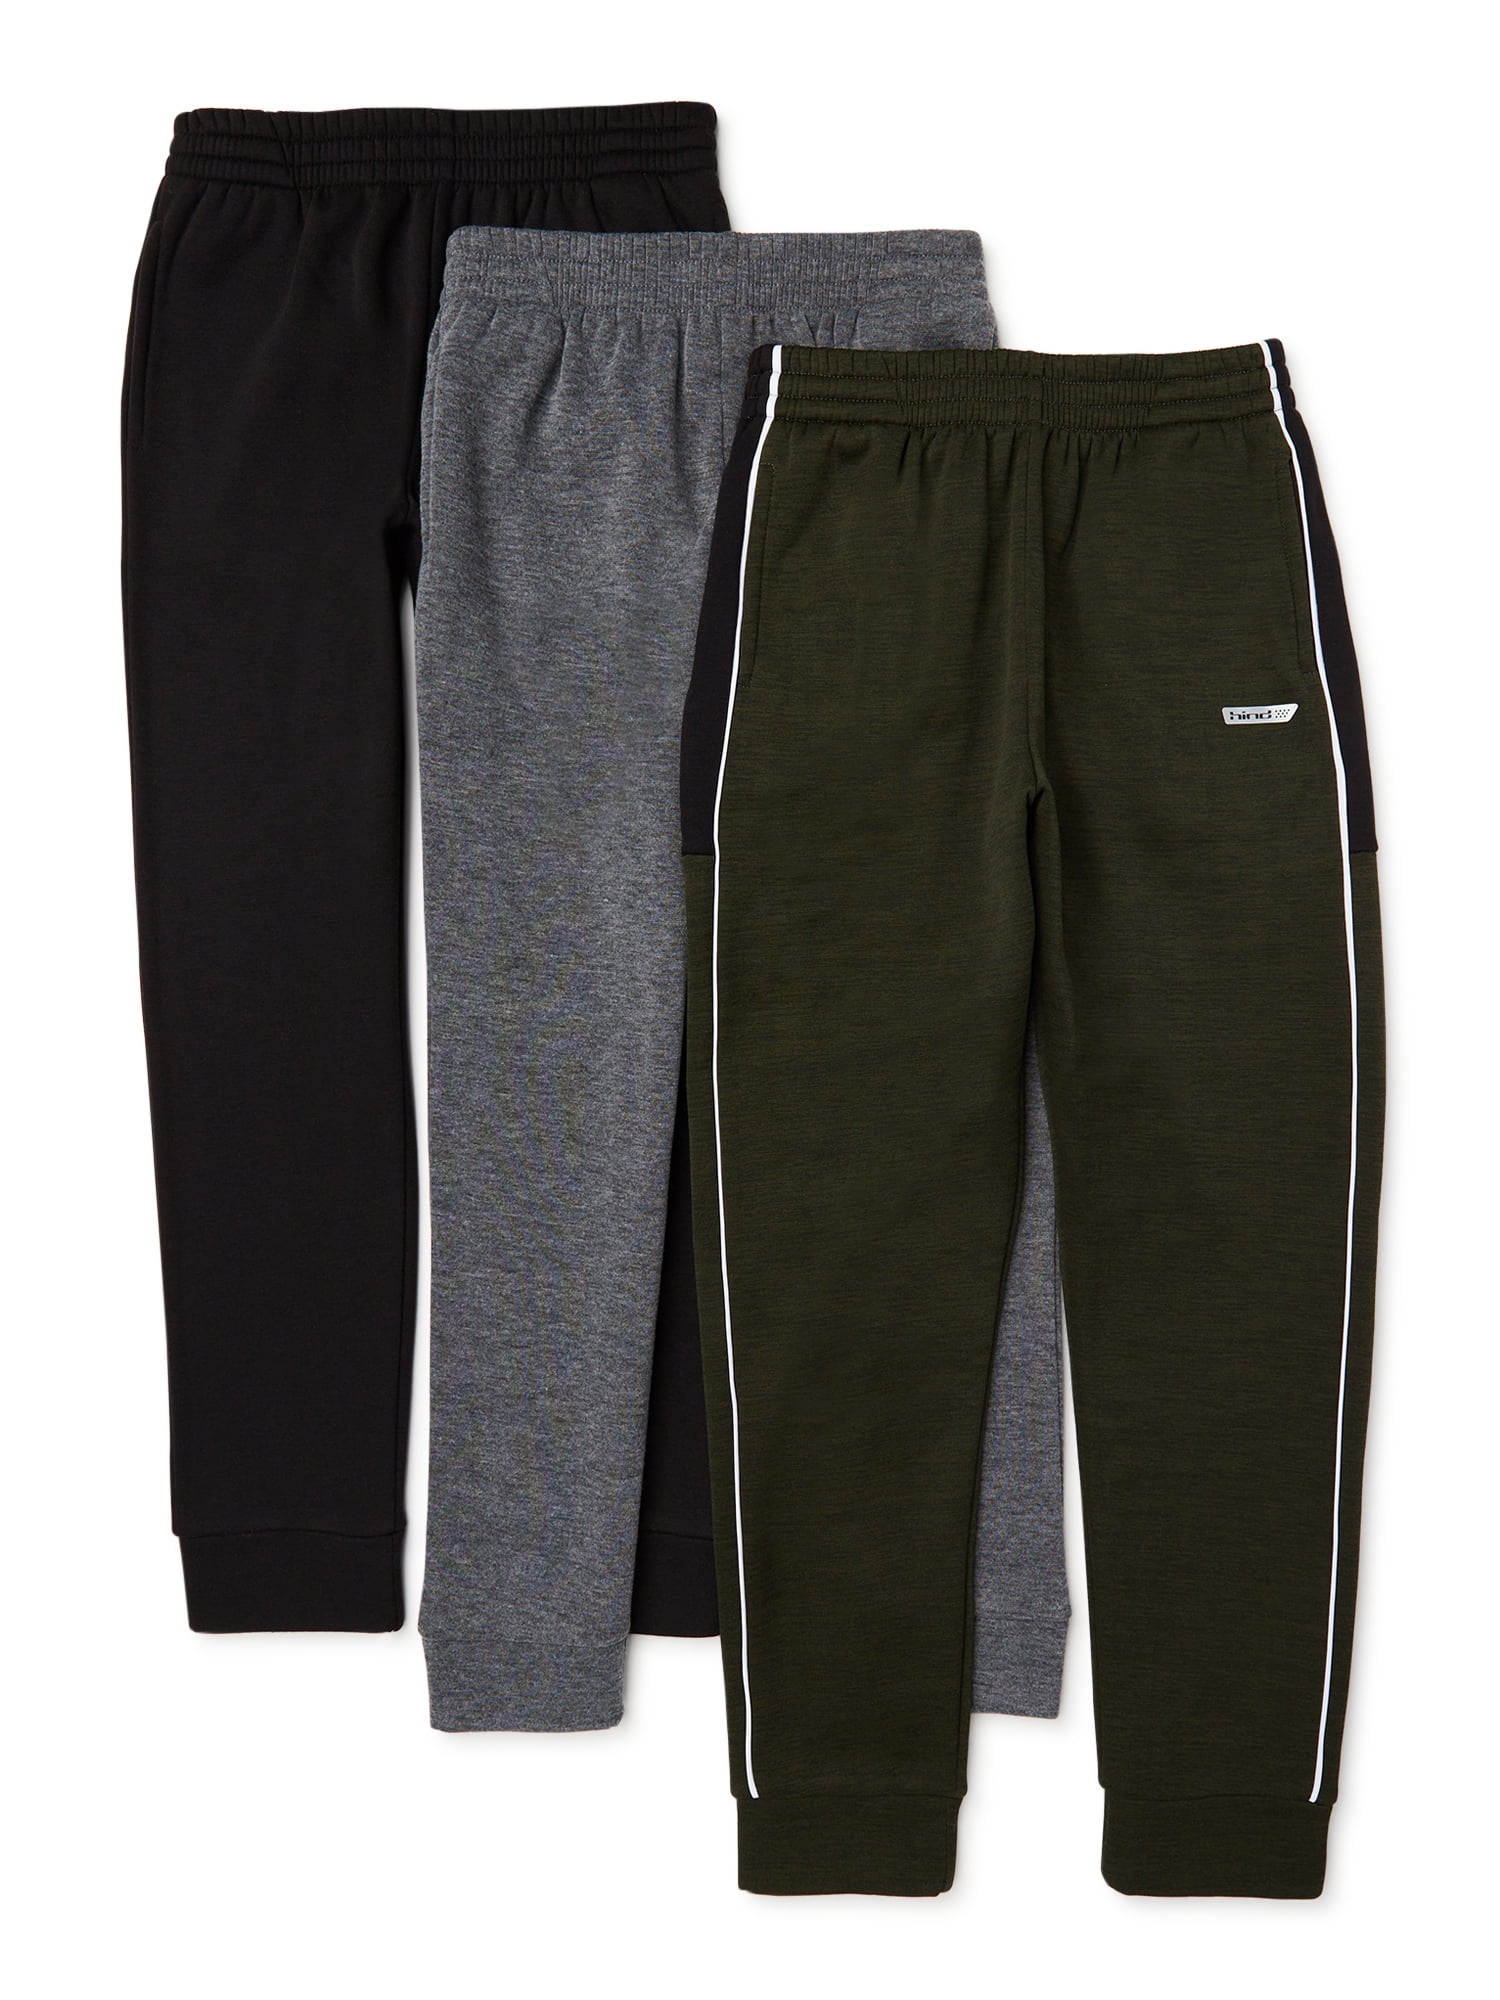 Hind Boys 3-Pack Fleece and Tricot Jogger Sweatpants with Pockets for Athletic & Casual Wear 